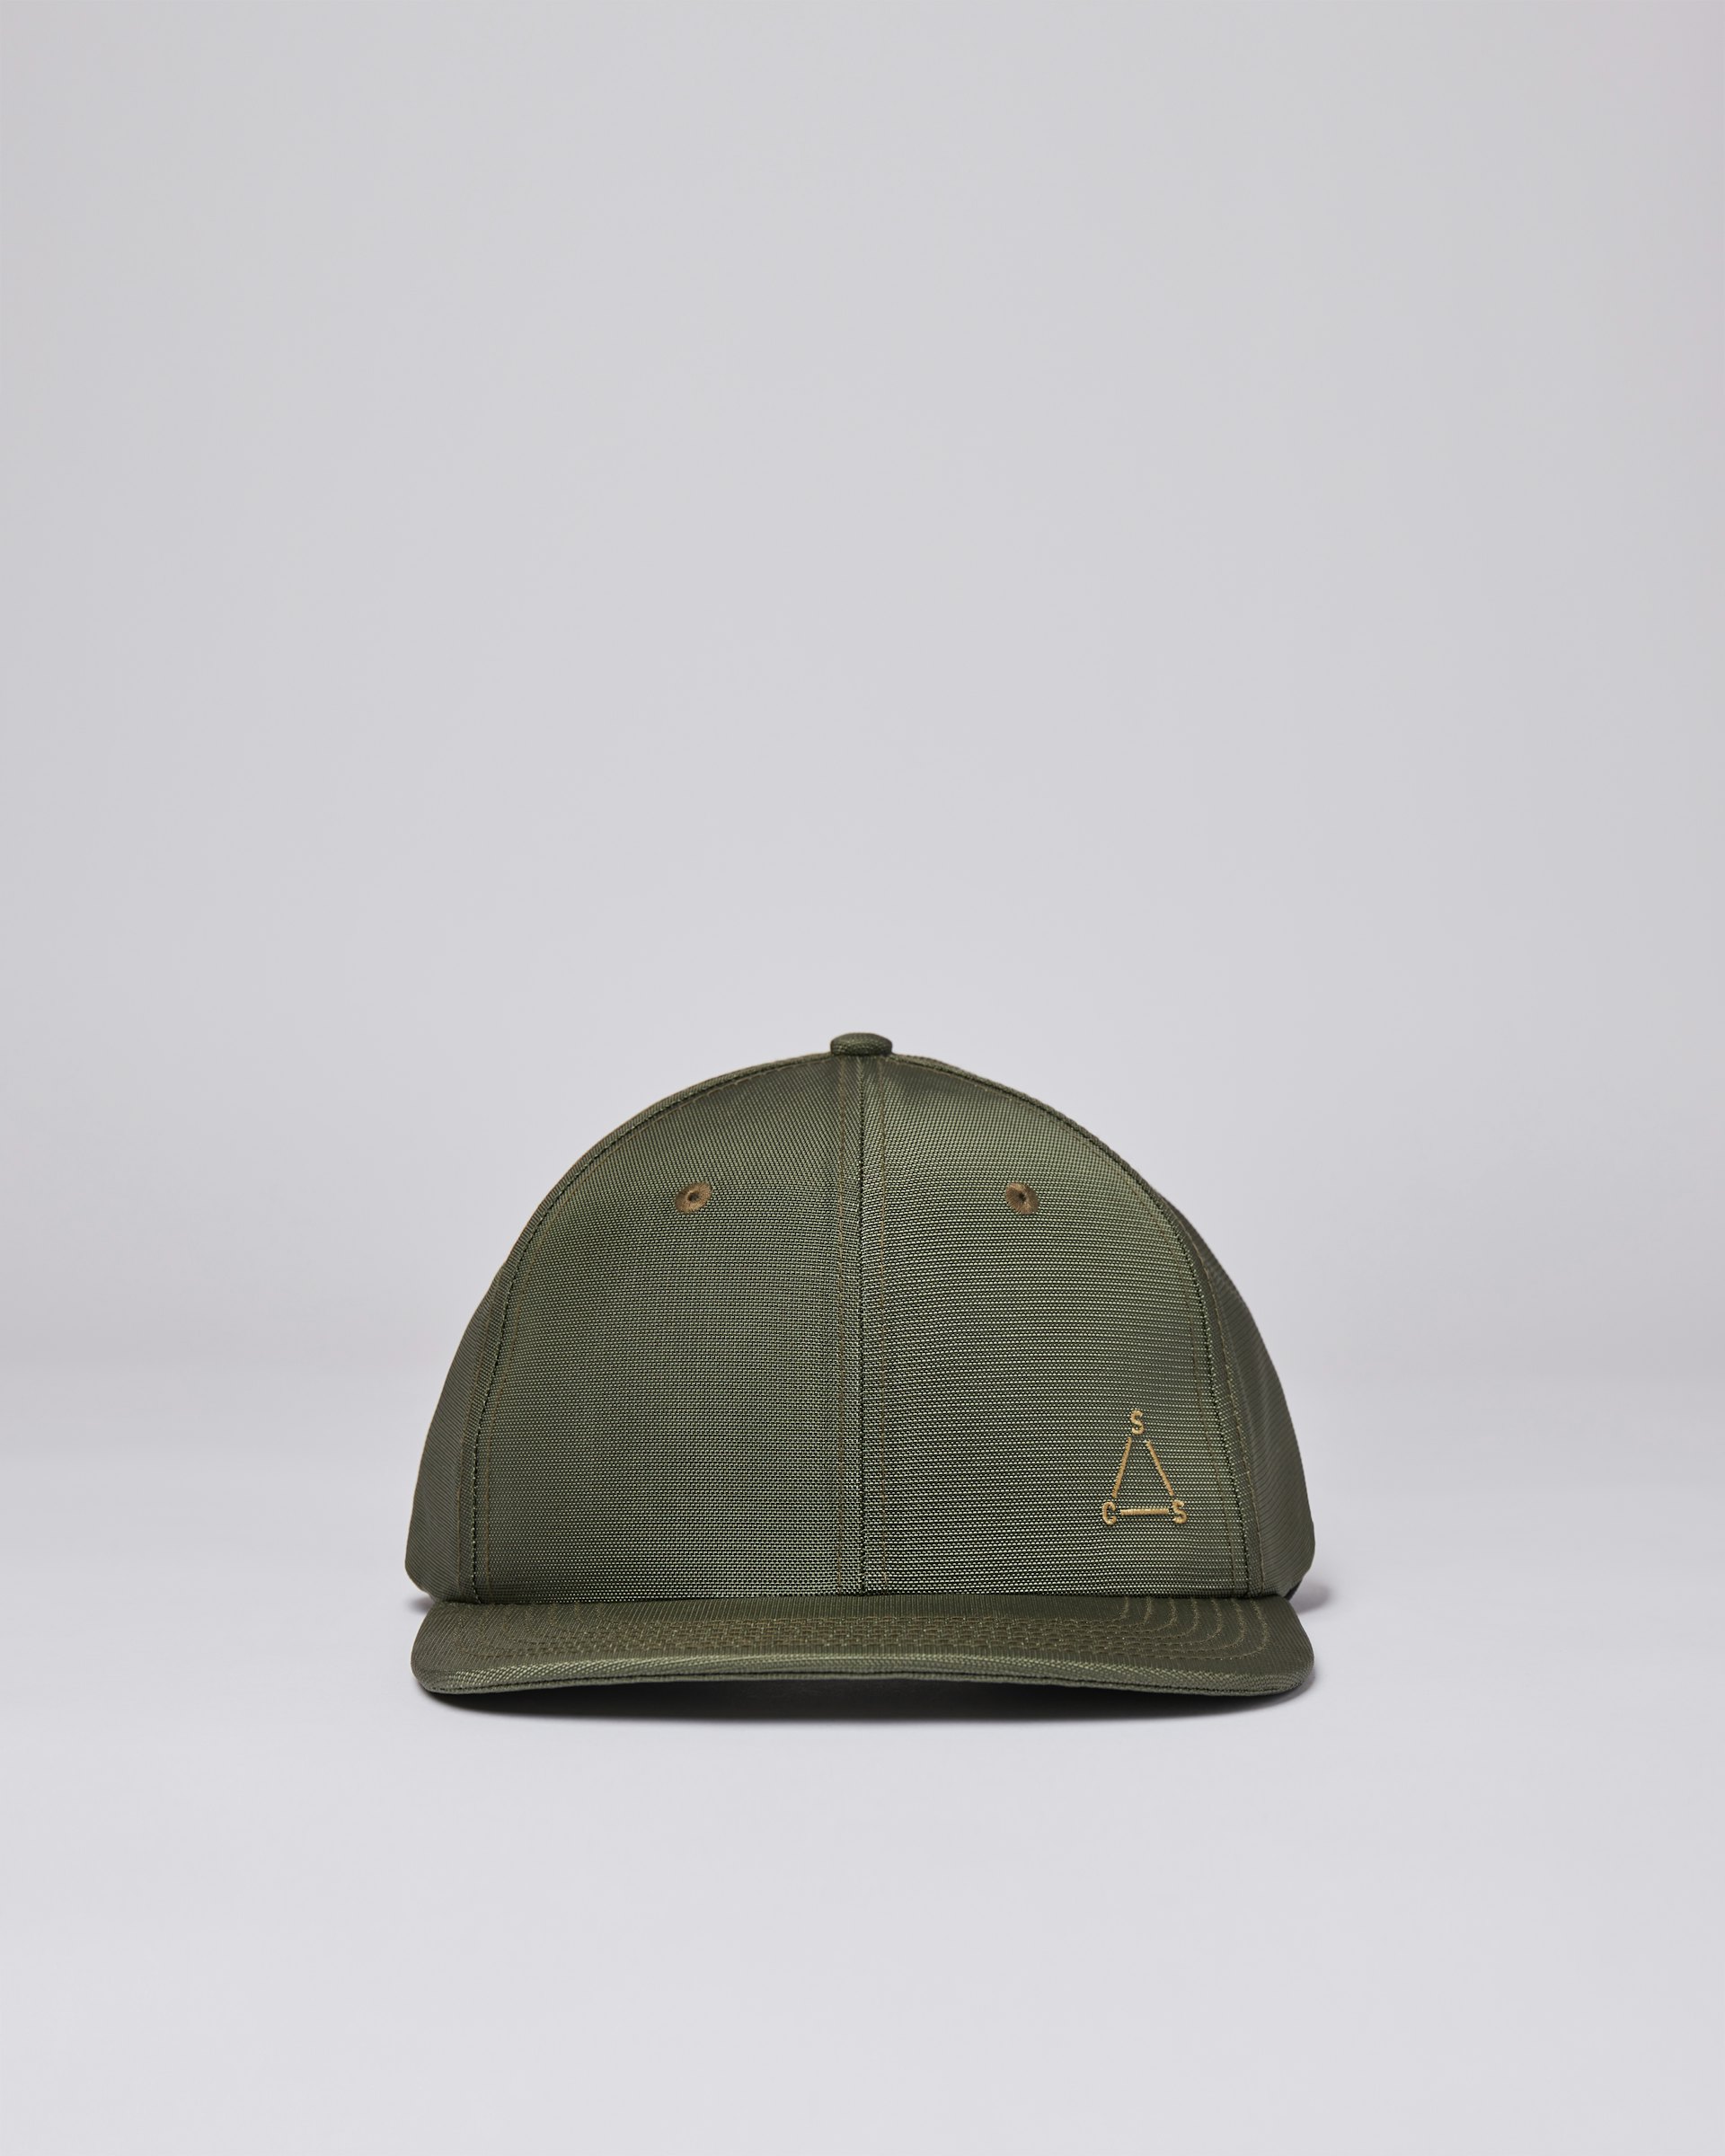 Hike Cap belongs to the category Items and is in color green